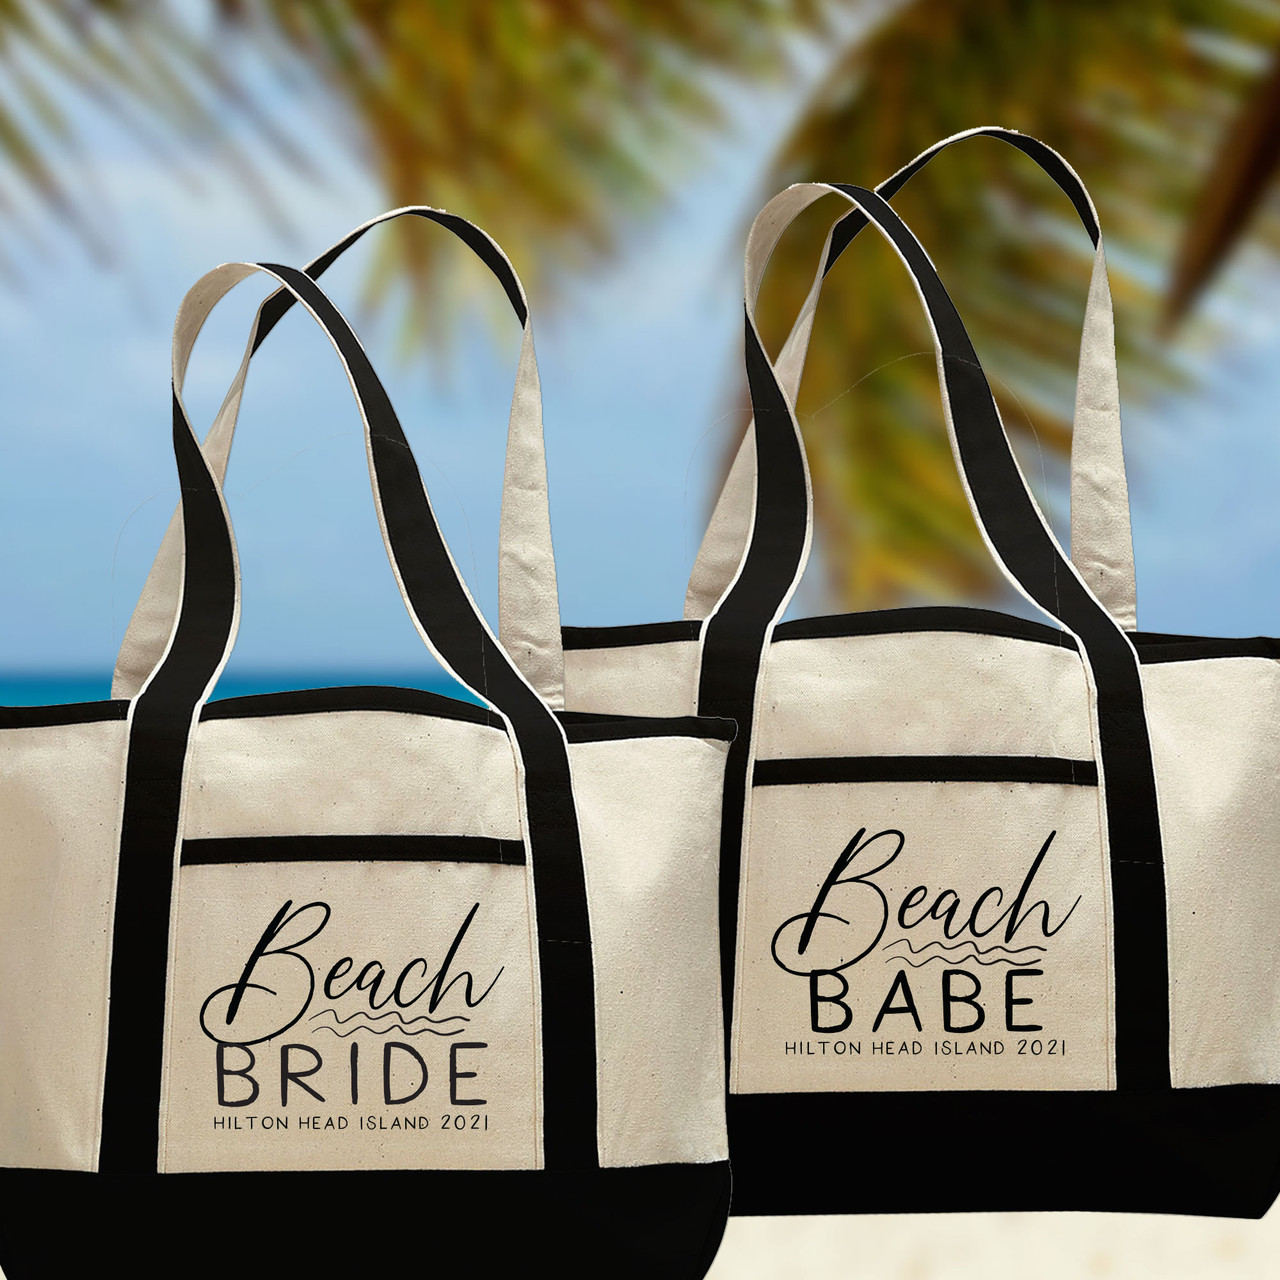 Personalized Jumbo Canvas Tote Bag